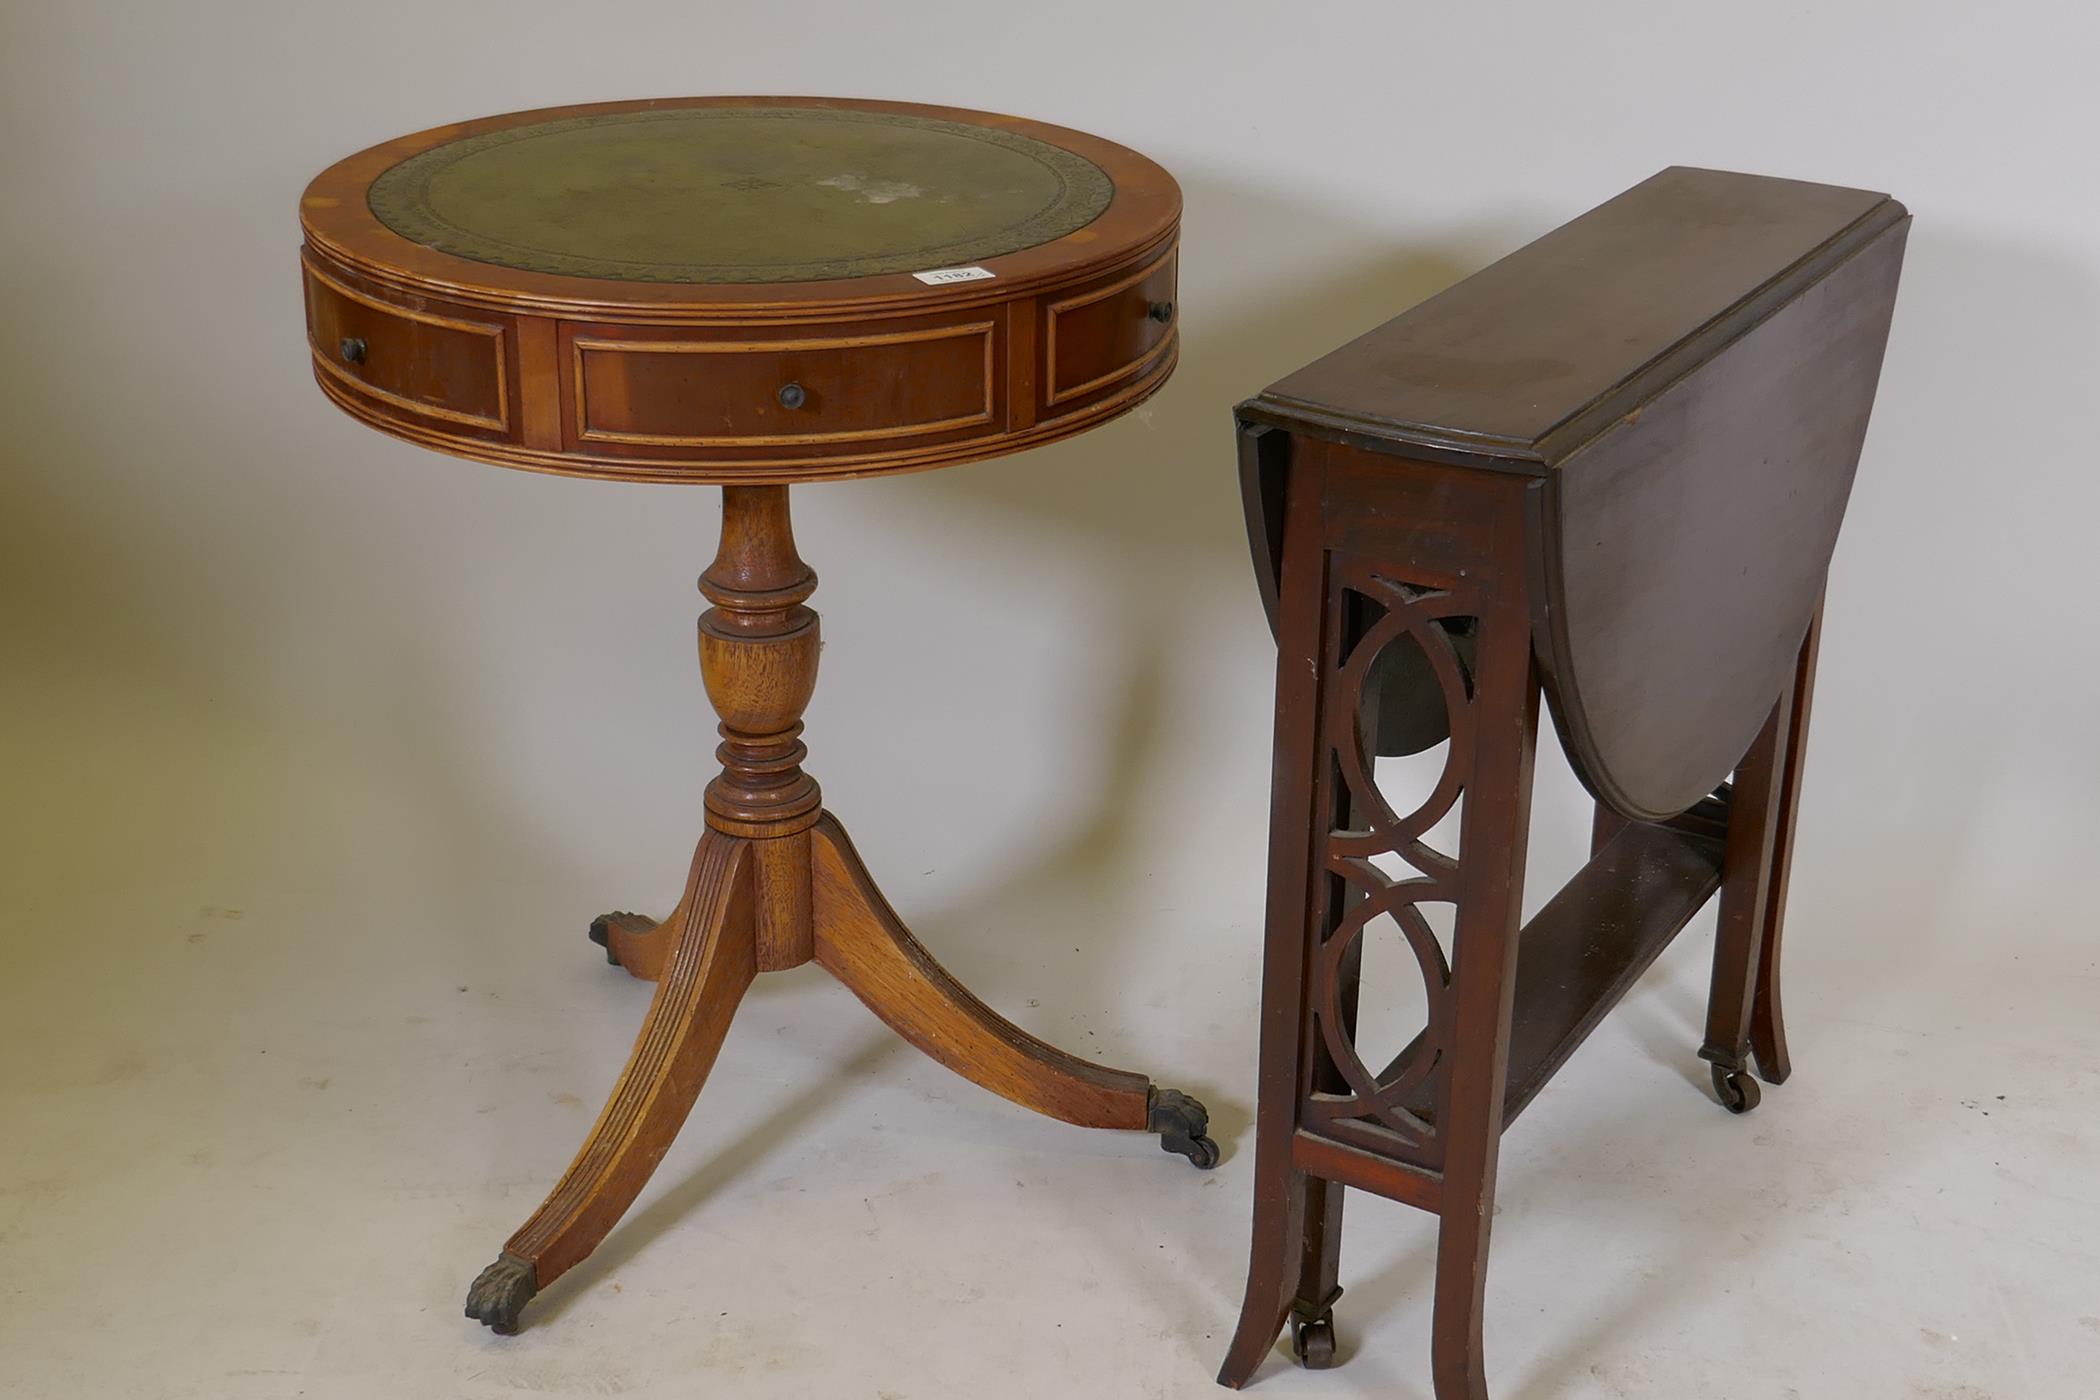 A small yew wood drum table with inset leather top, two true and four false drawers, raised on